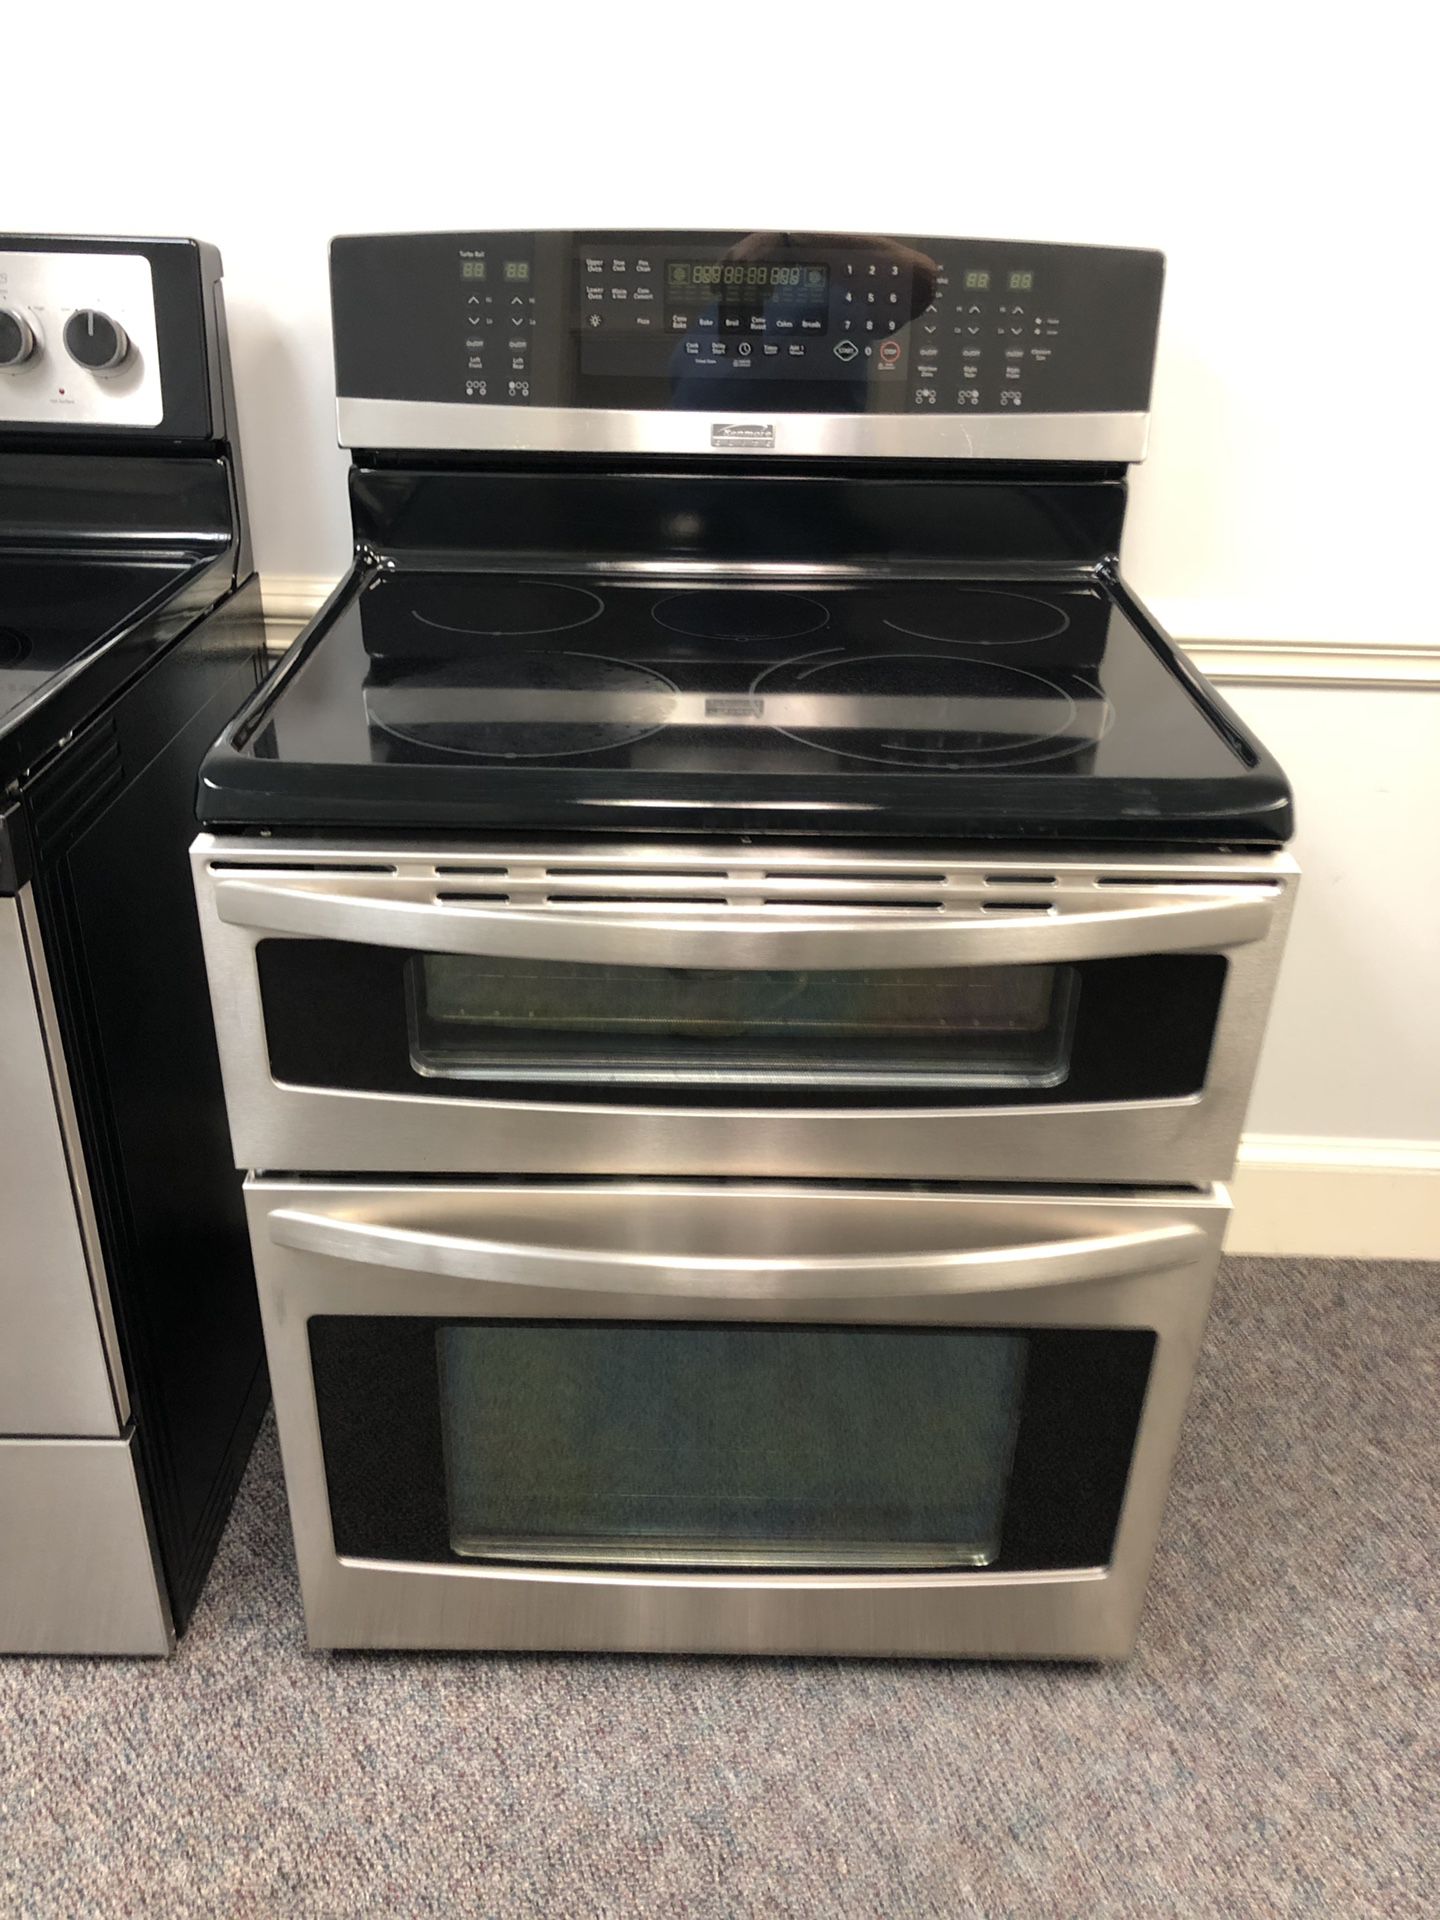 Kenmore Elite touch Screen Glass Top convection double oven stove